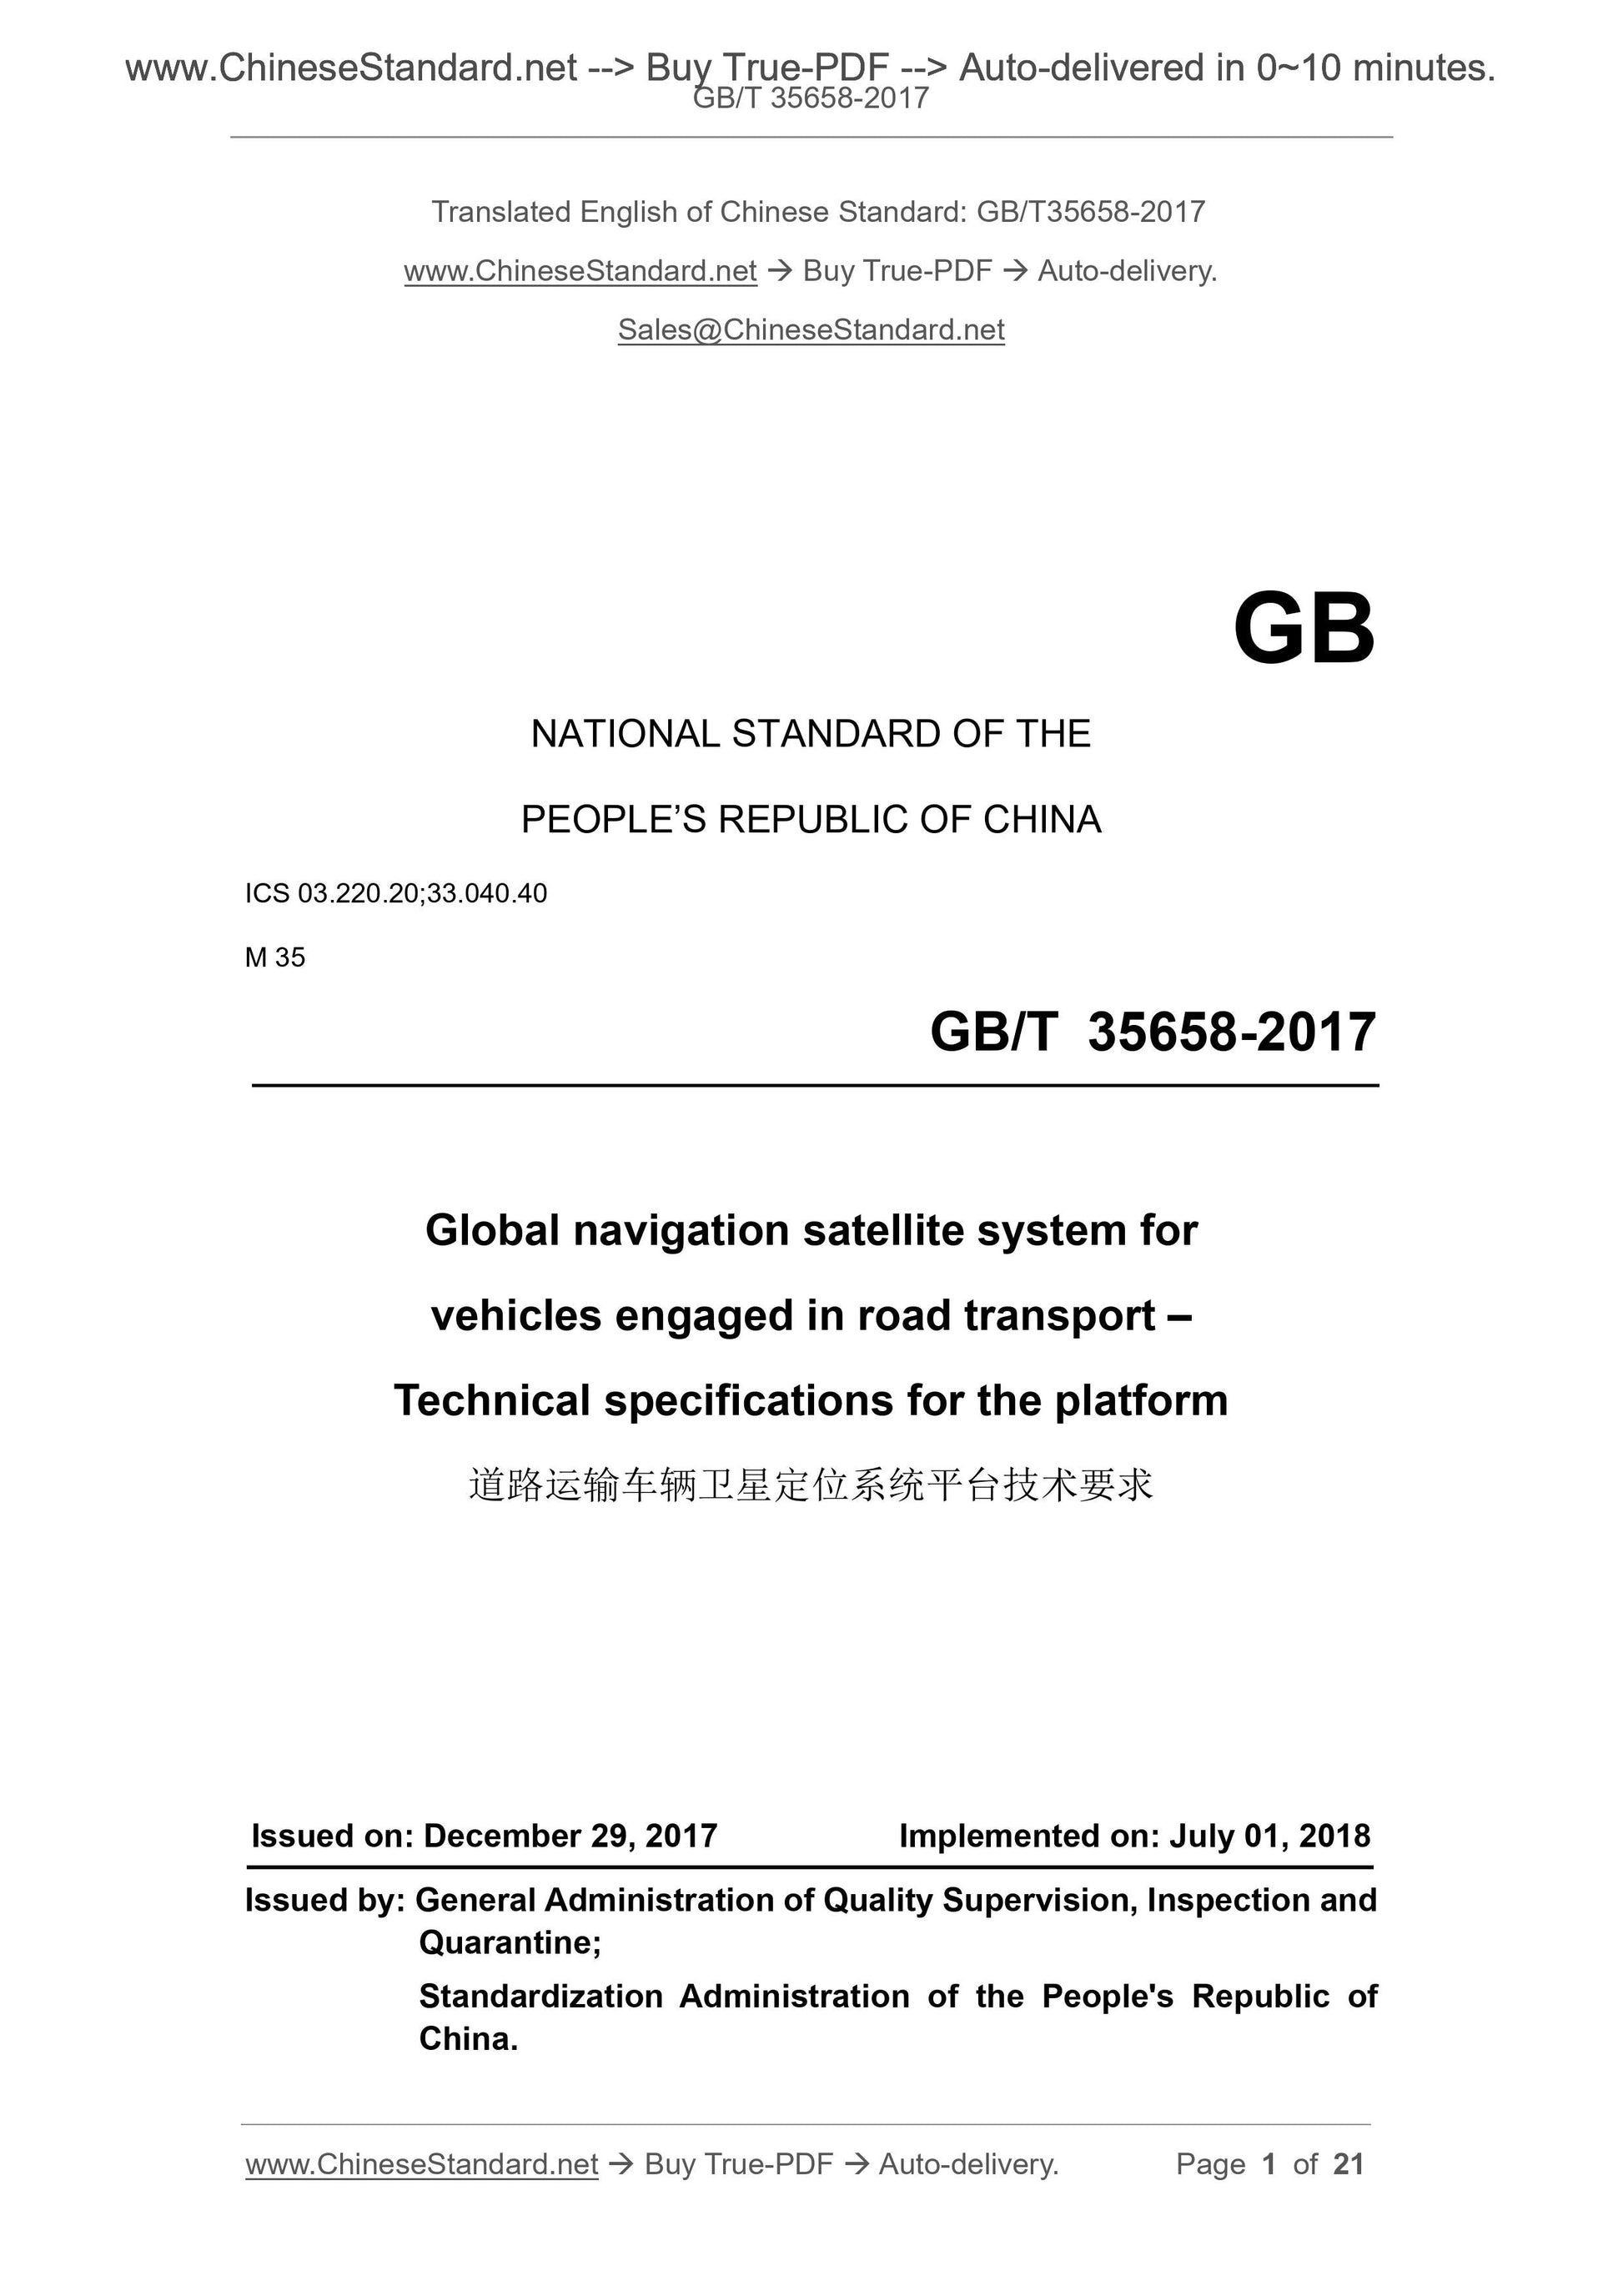 GB/T 35658-2017 Page 1